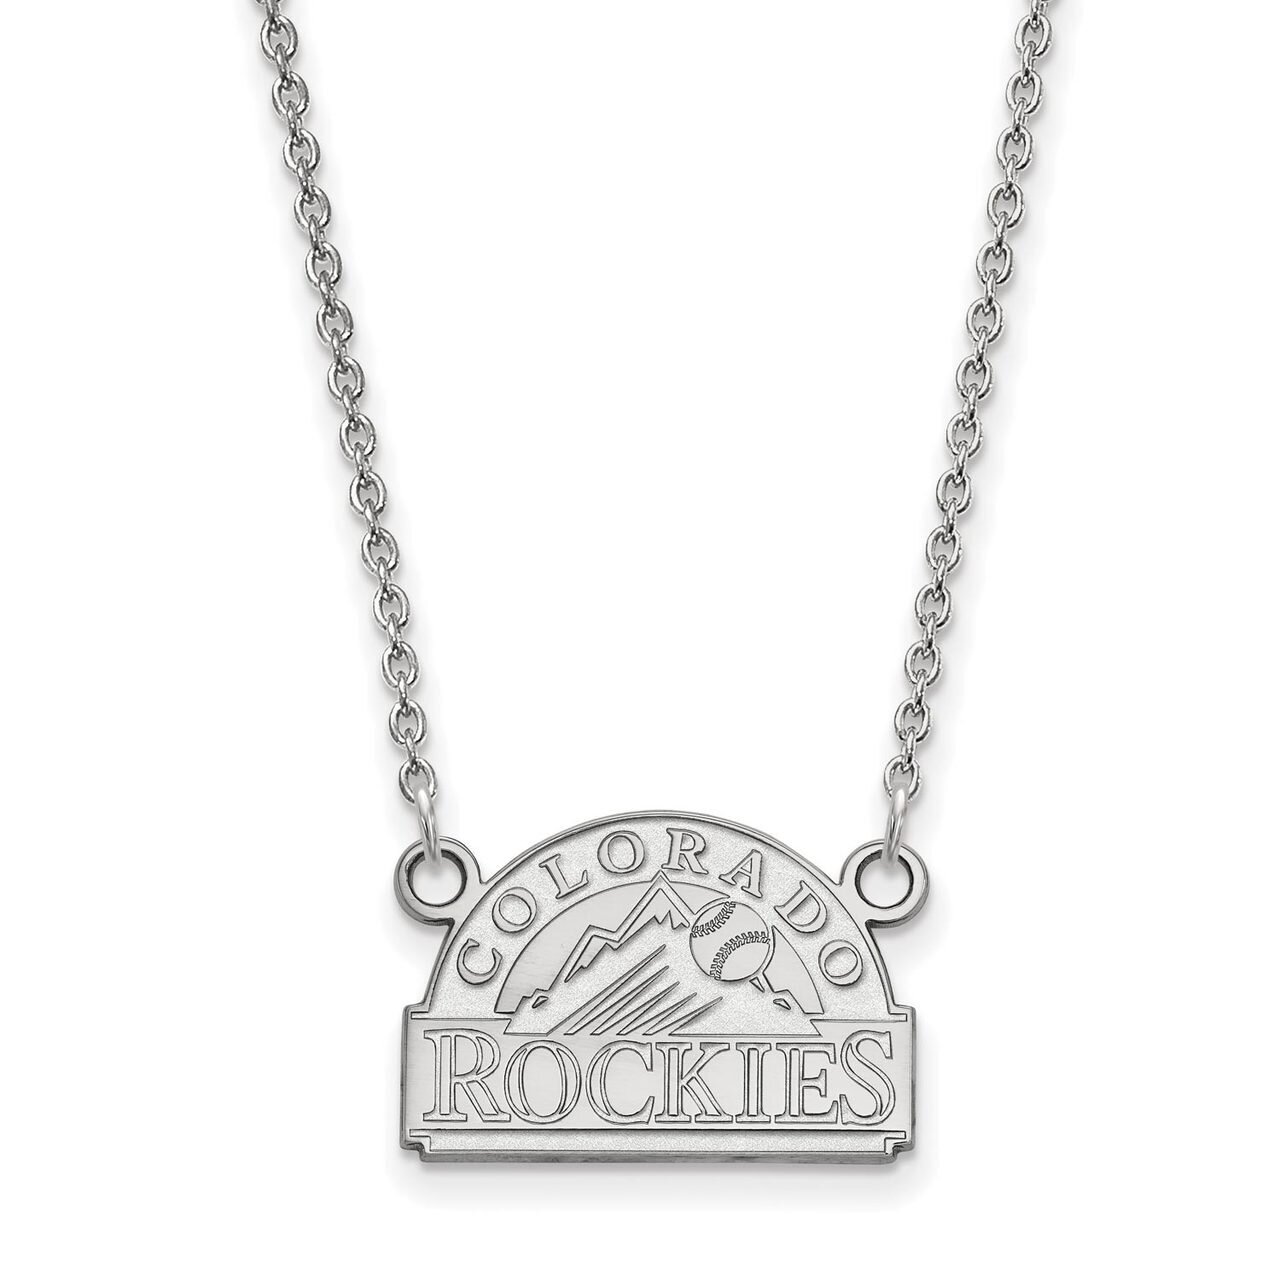 Colorado Rockies Small Pendant with Chain Necklace 10k White Gold 1W006ROK-18